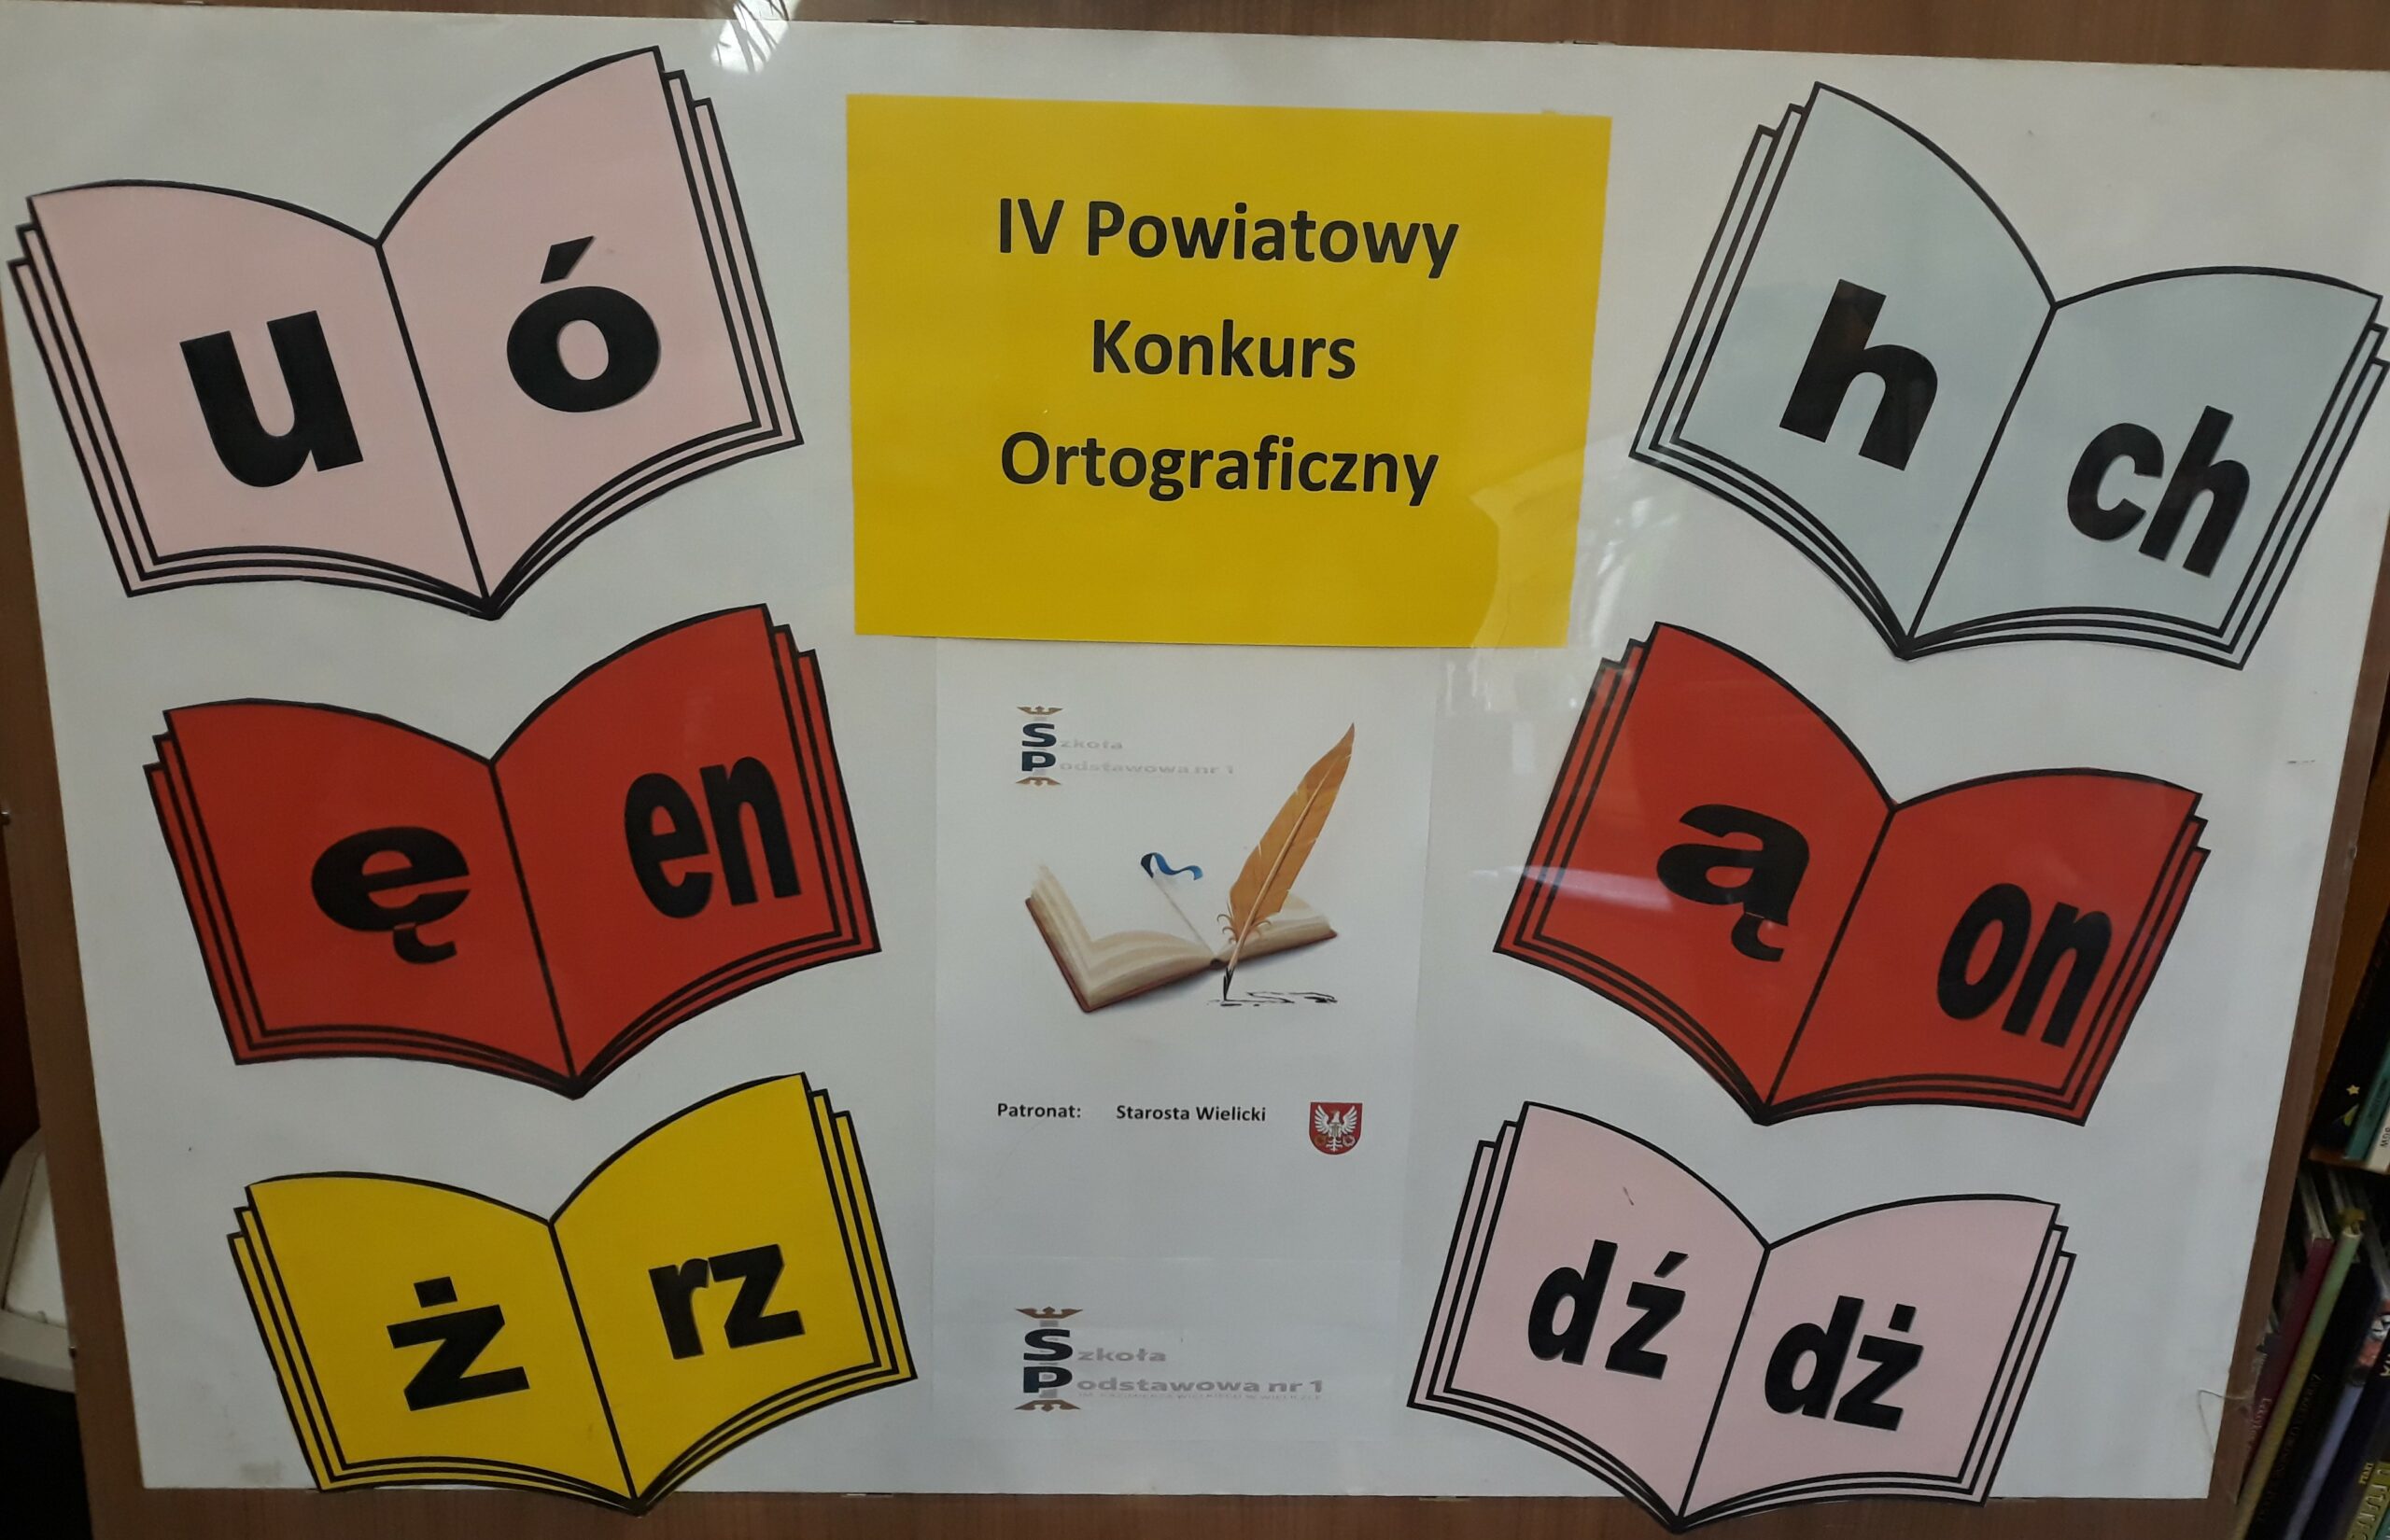 You are currently viewing IV Powiatowy Konkurs Ortograficzny